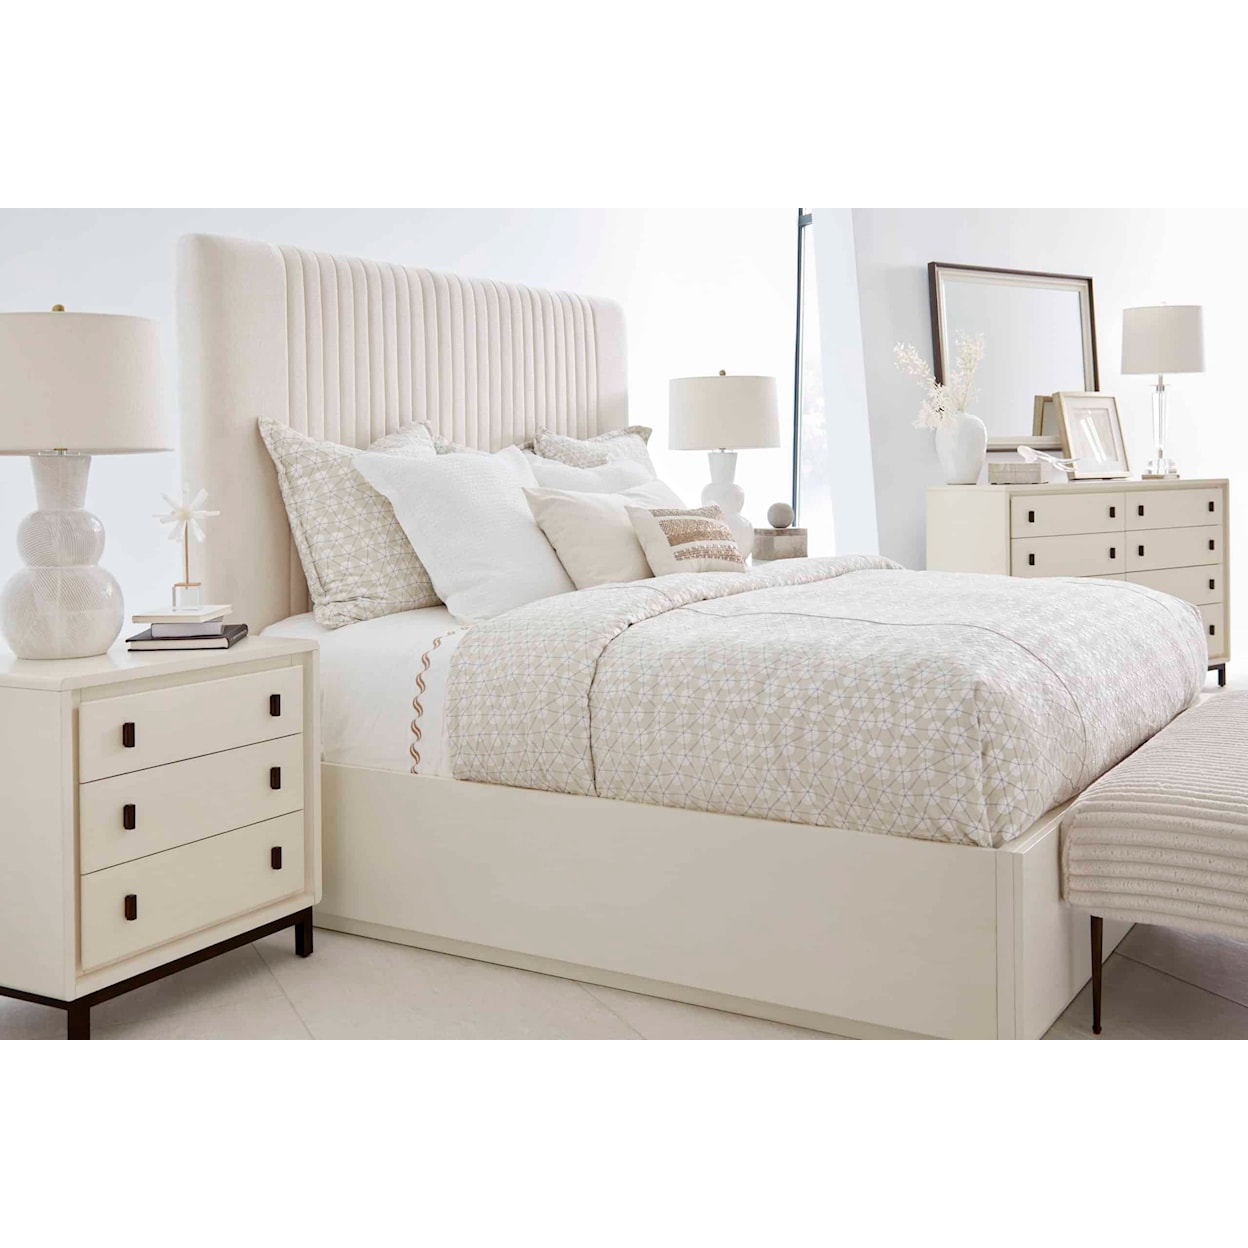 A.R.T. Furniture Inc Blanc Queen Upholstered Bed